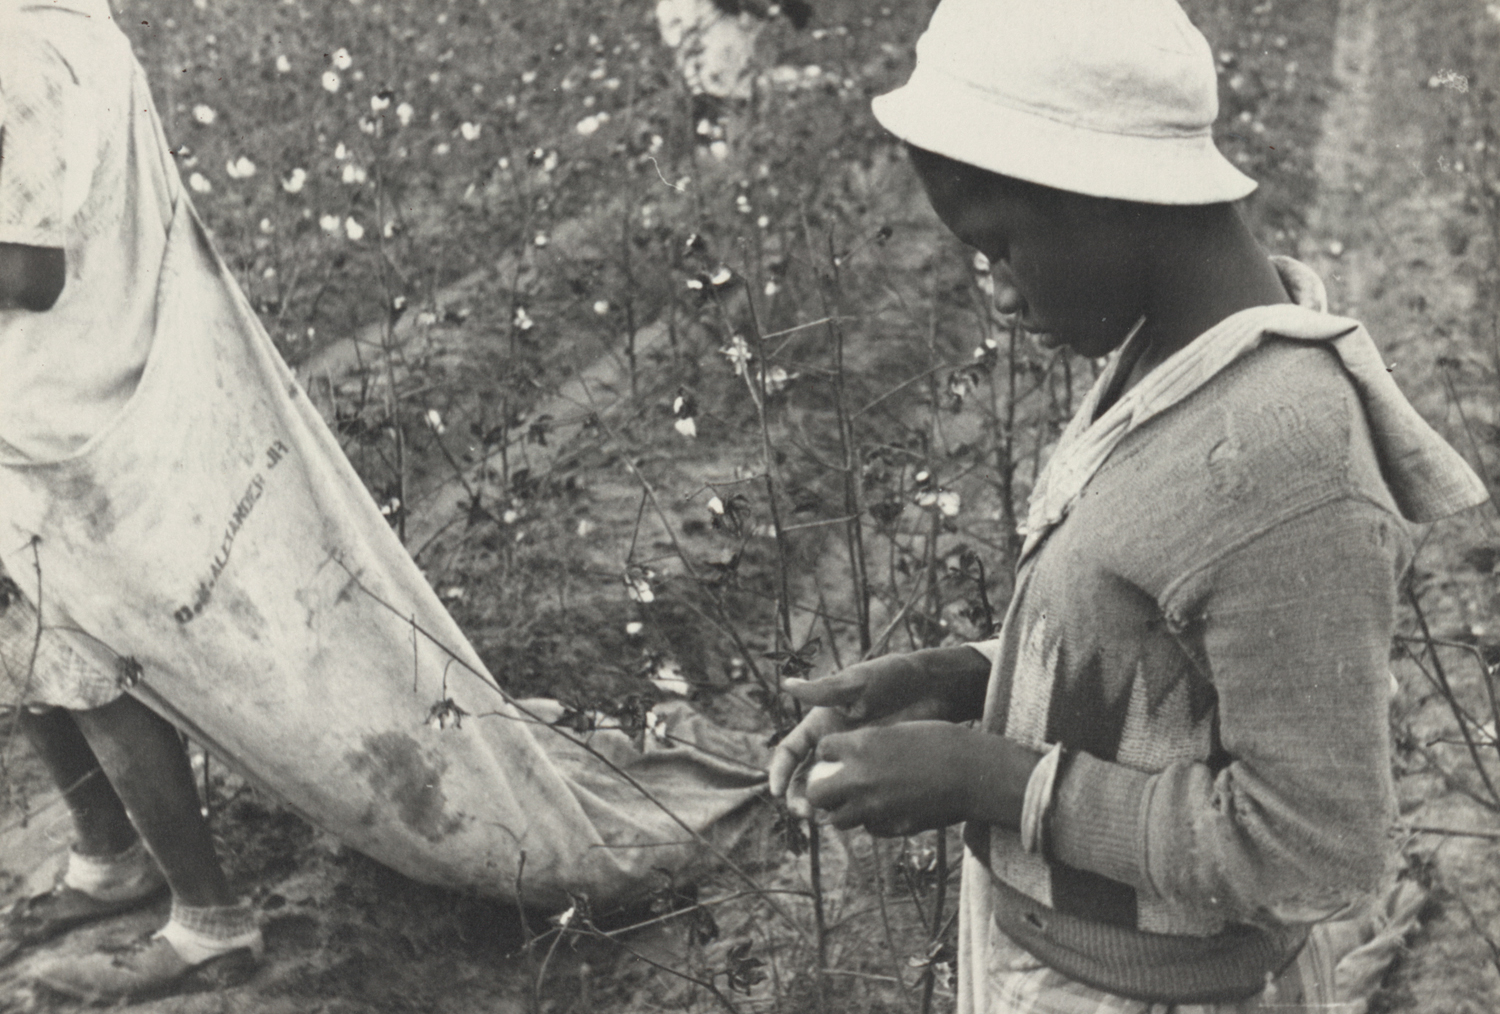 A young African American Young cotton picker in Arkansas during the Depression. (Buyenlarge/Getty Images)